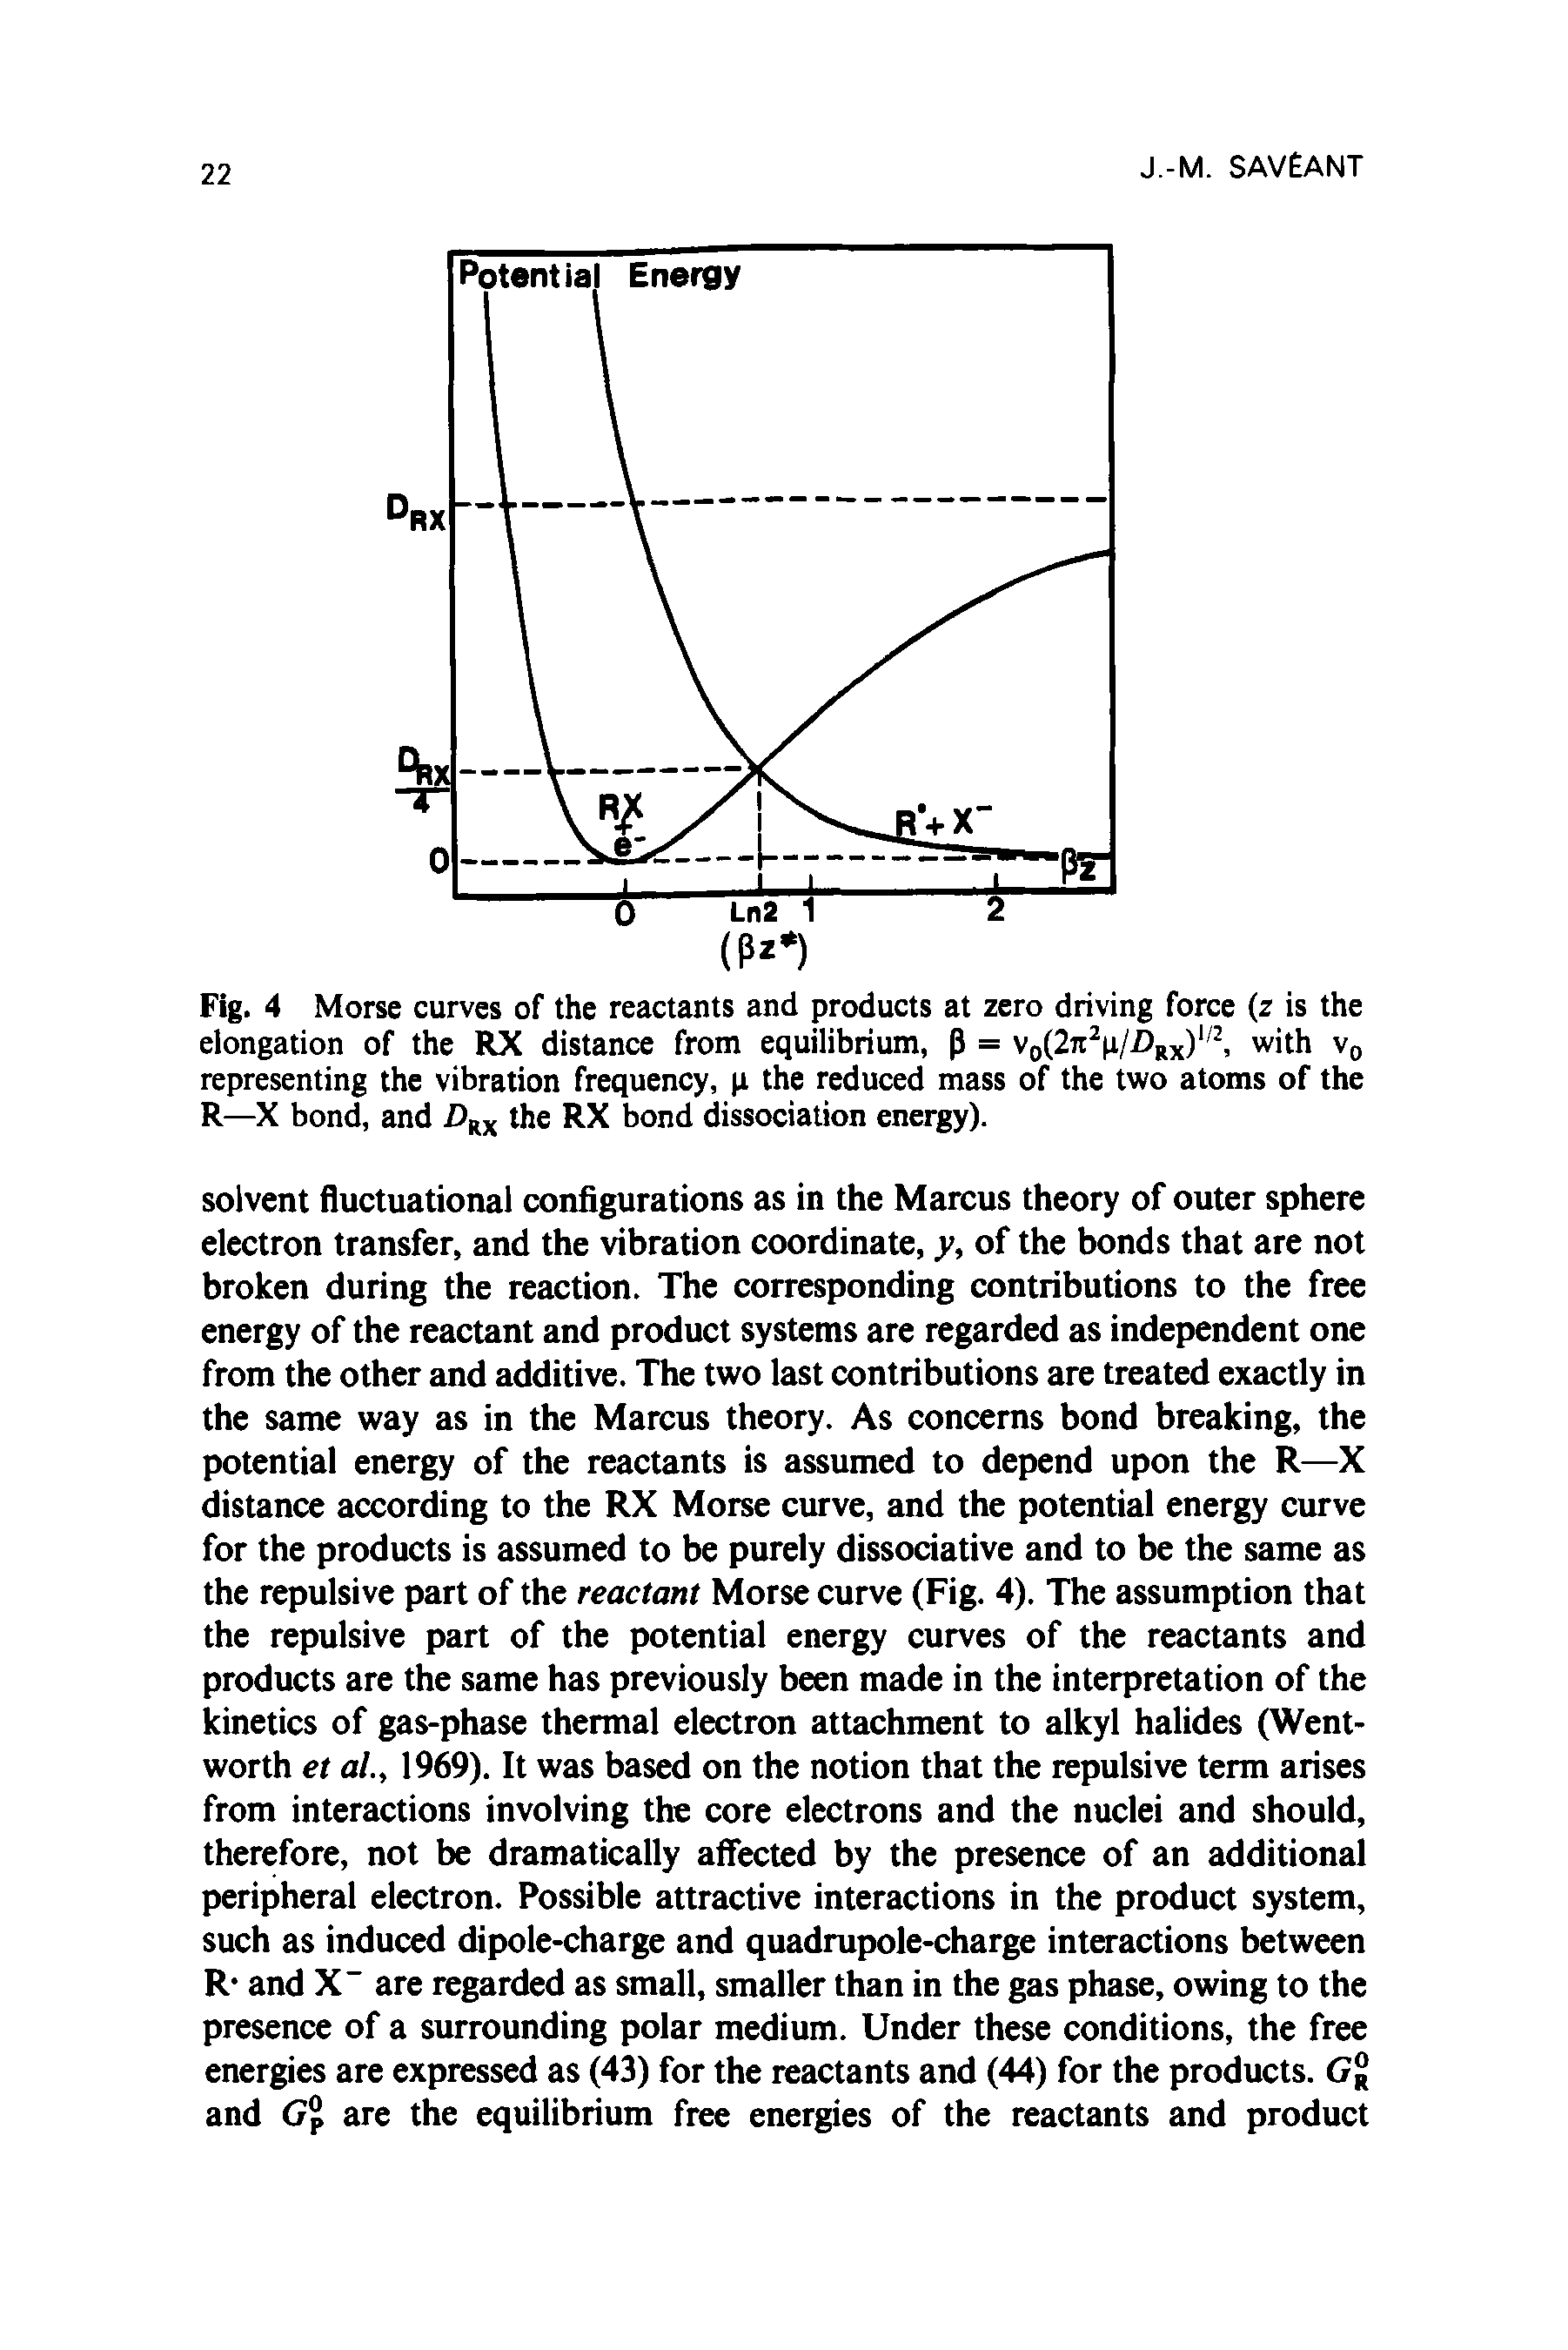 Fig. 4 Morse curves of the reactants and products at zero driving force (z is the elongation of the RX distance from equilibrium, P = V(,(2Jt p/ )Rx) with Vq representing the vibration frequency, p the reduced mass of the two atoms of the R—X bond, and the RX bond dissociation energy).